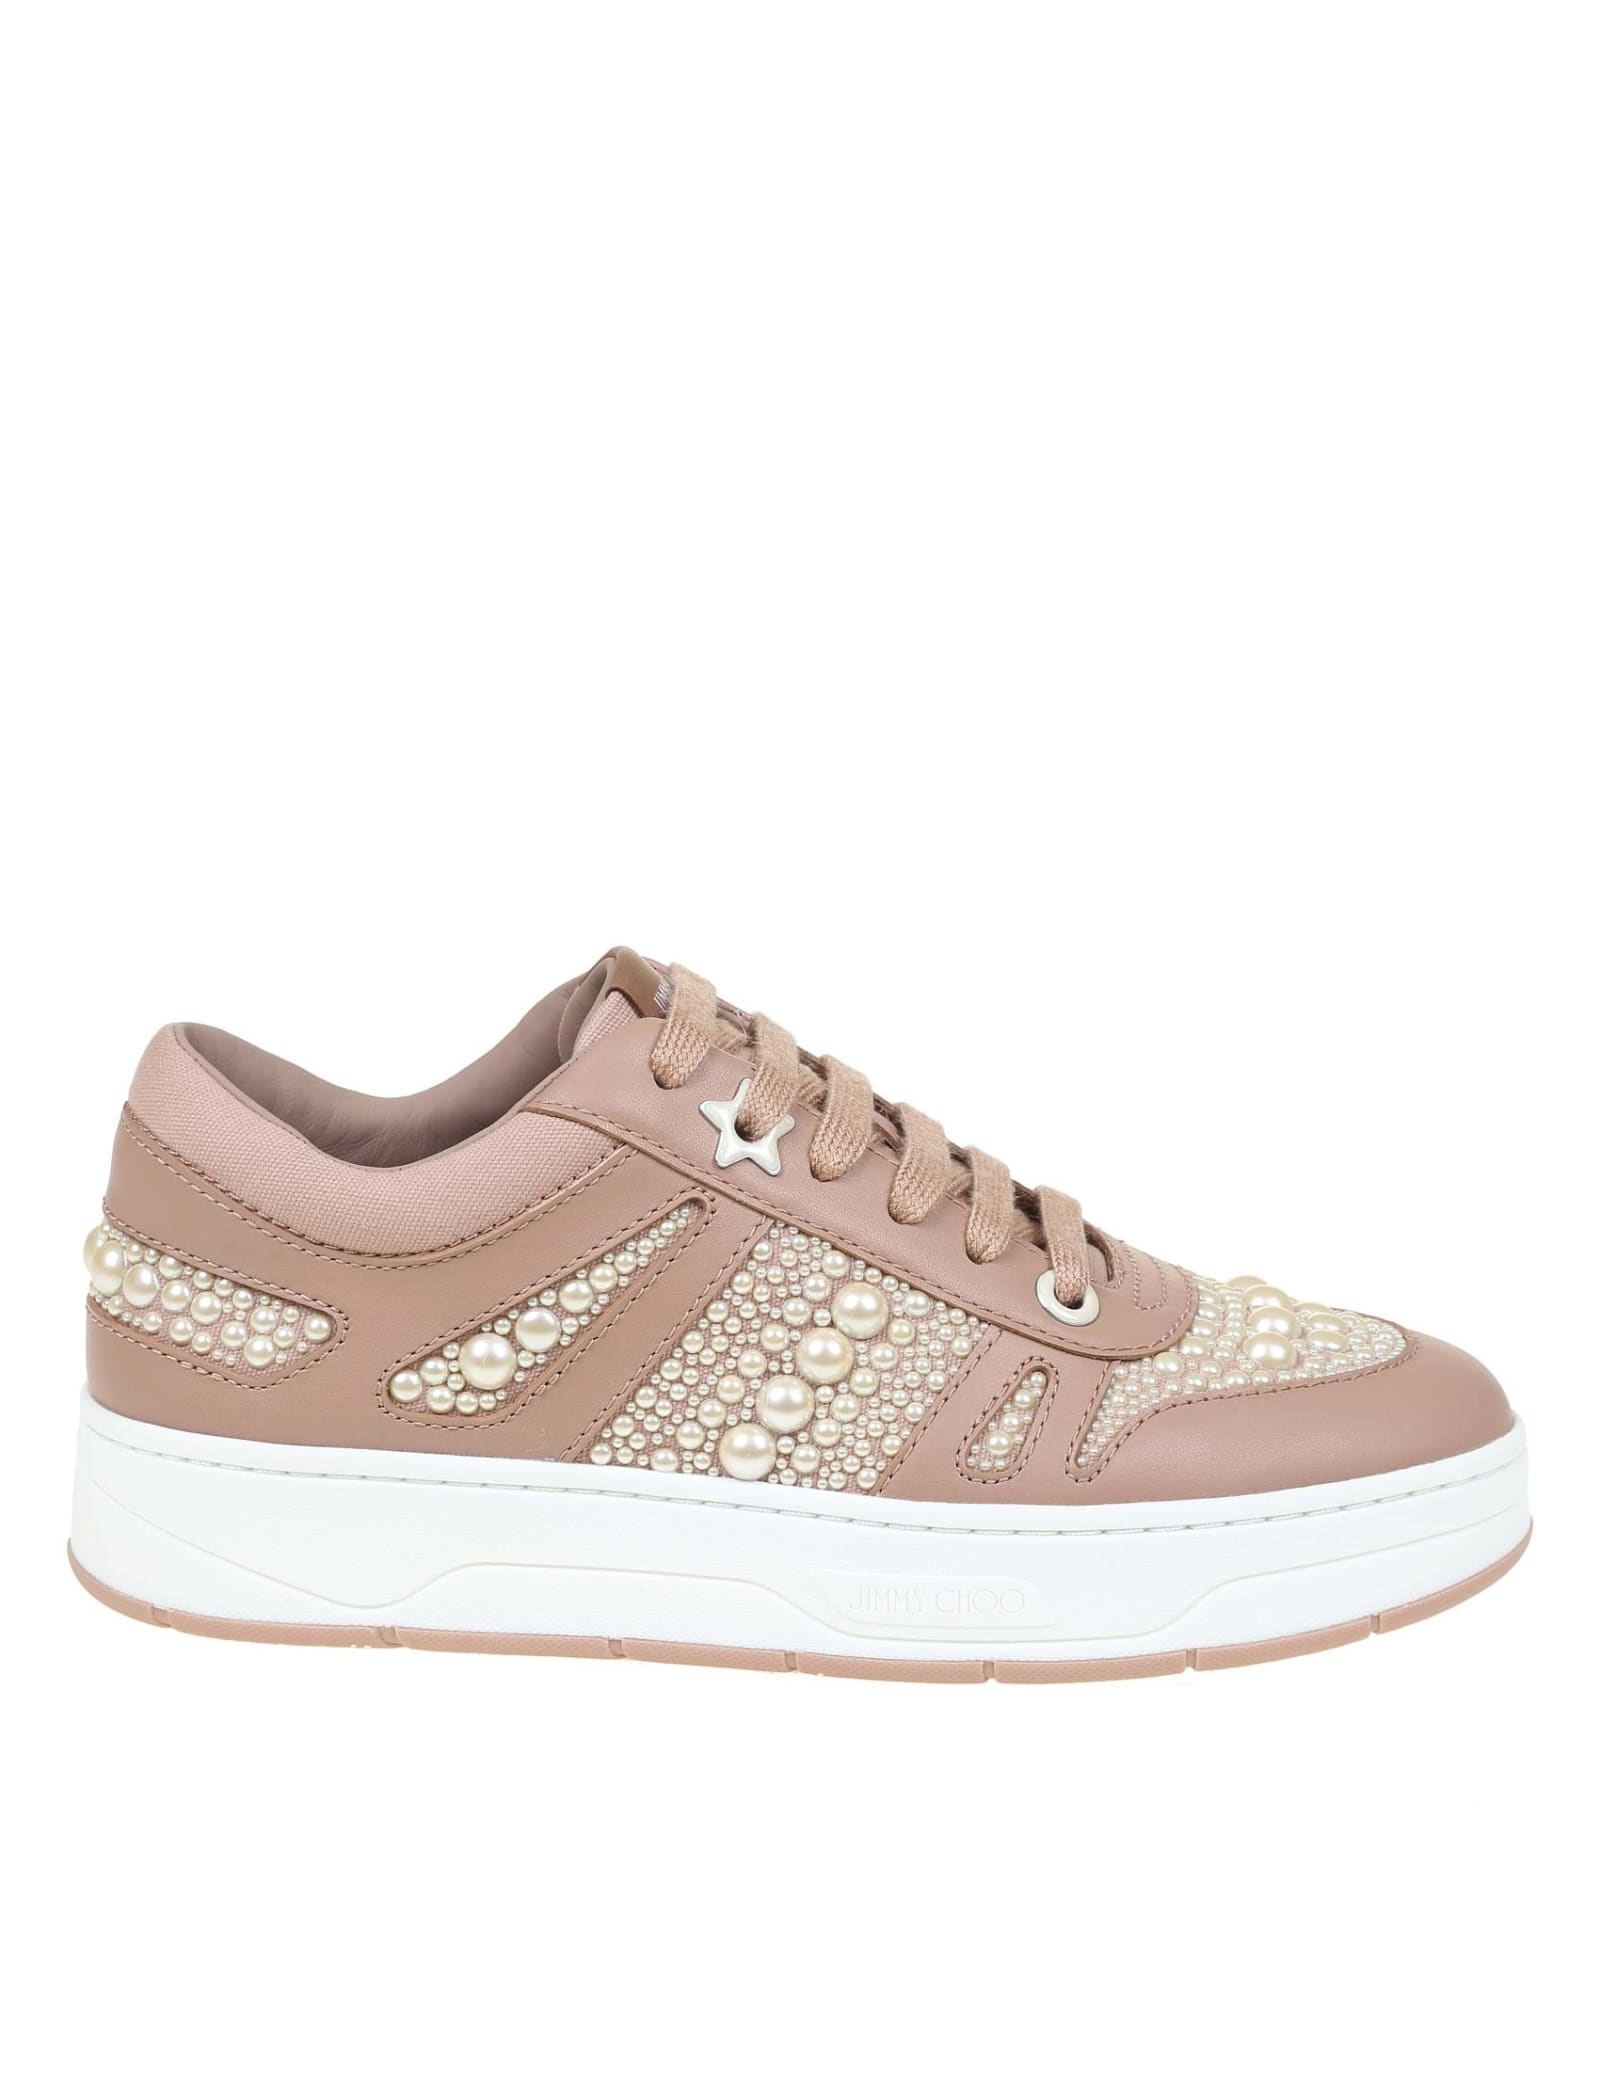 Buy Jimmy Choo Hawaii Sneakers In Leather With Pearls online, shop Jimmy Choo shoes with free shipping